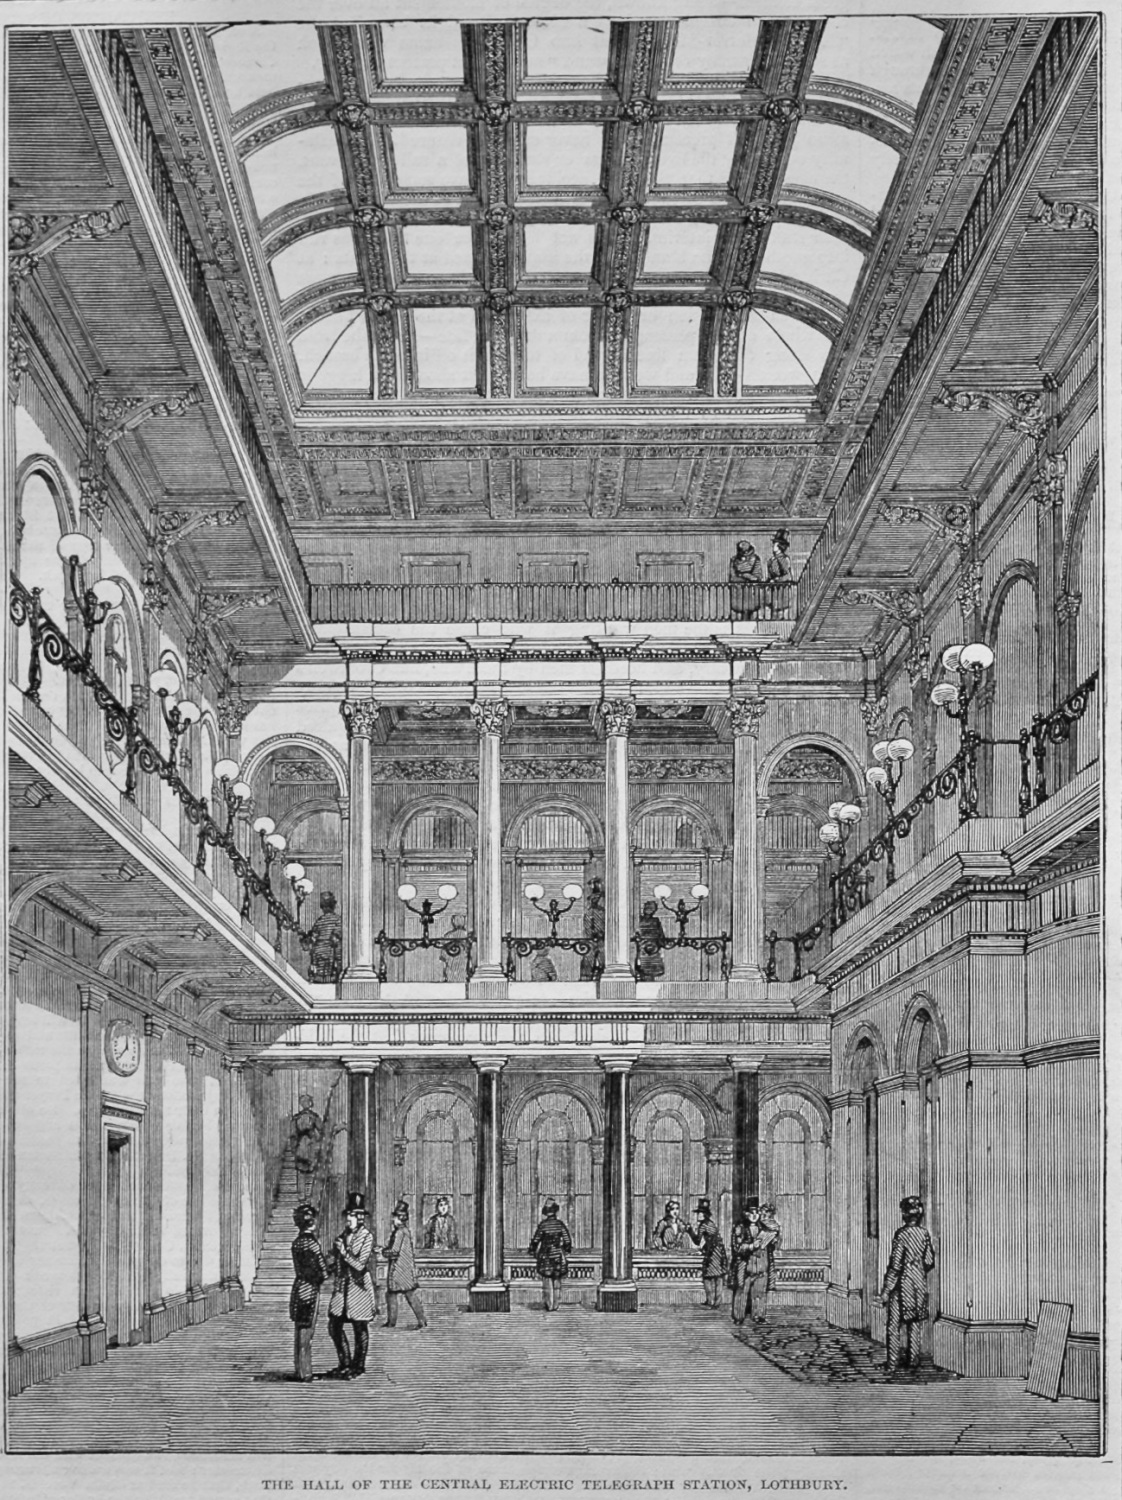 The Hall of the Central Electric Telegraph Station, Lothbury.  1848.